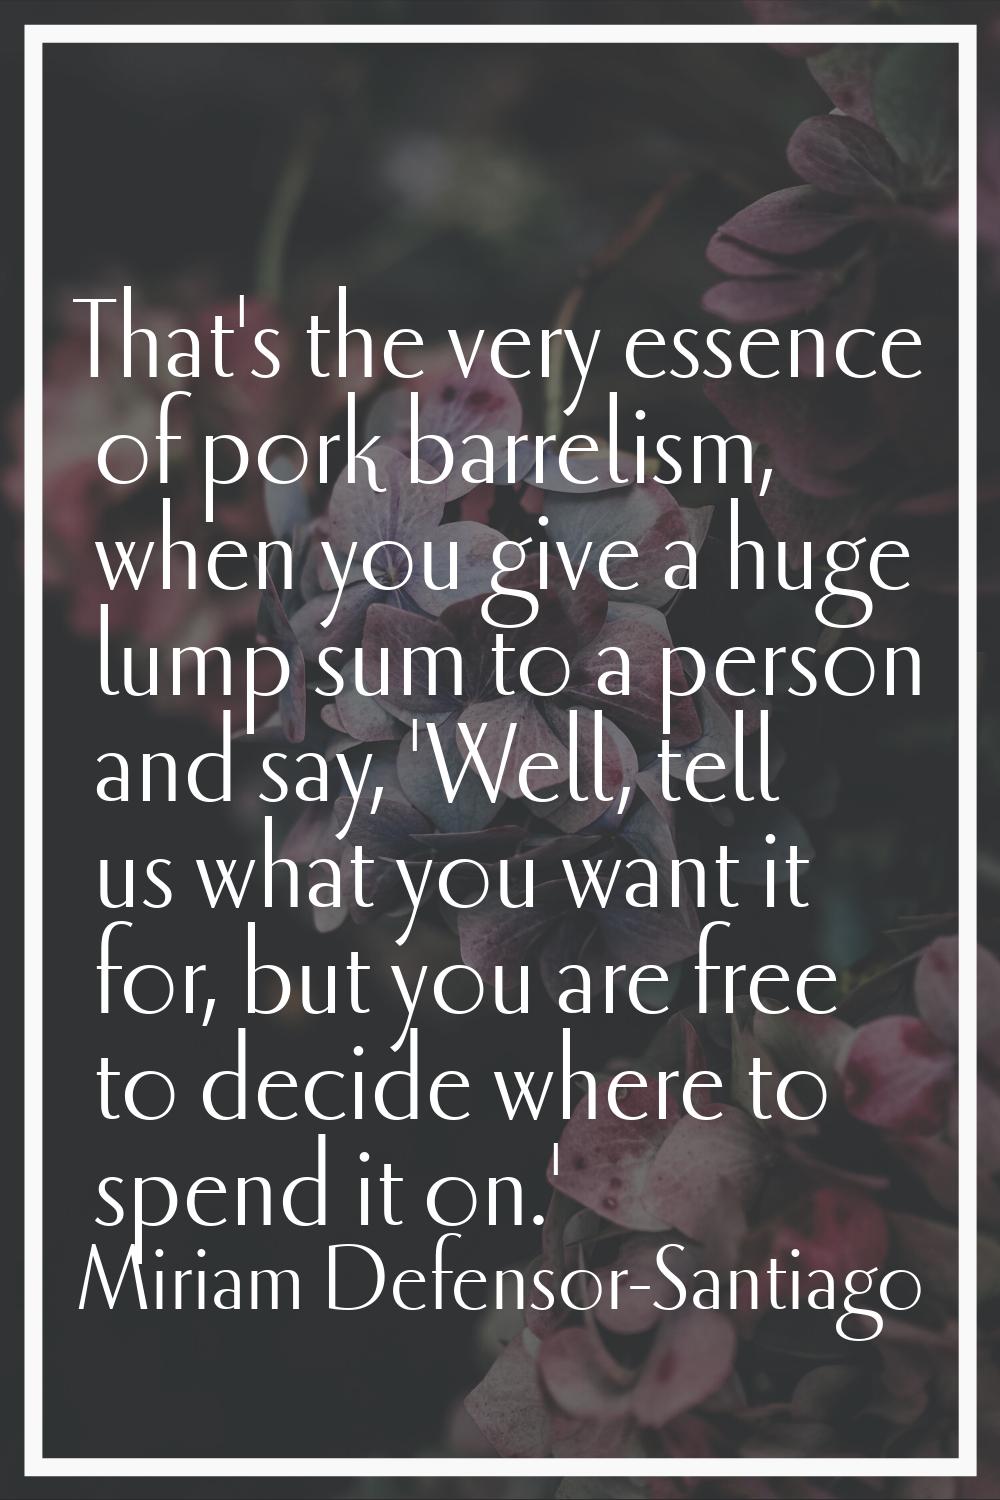 That's the very essence of pork barrelism, when you give a huge lump sum to a person and say, 'Well